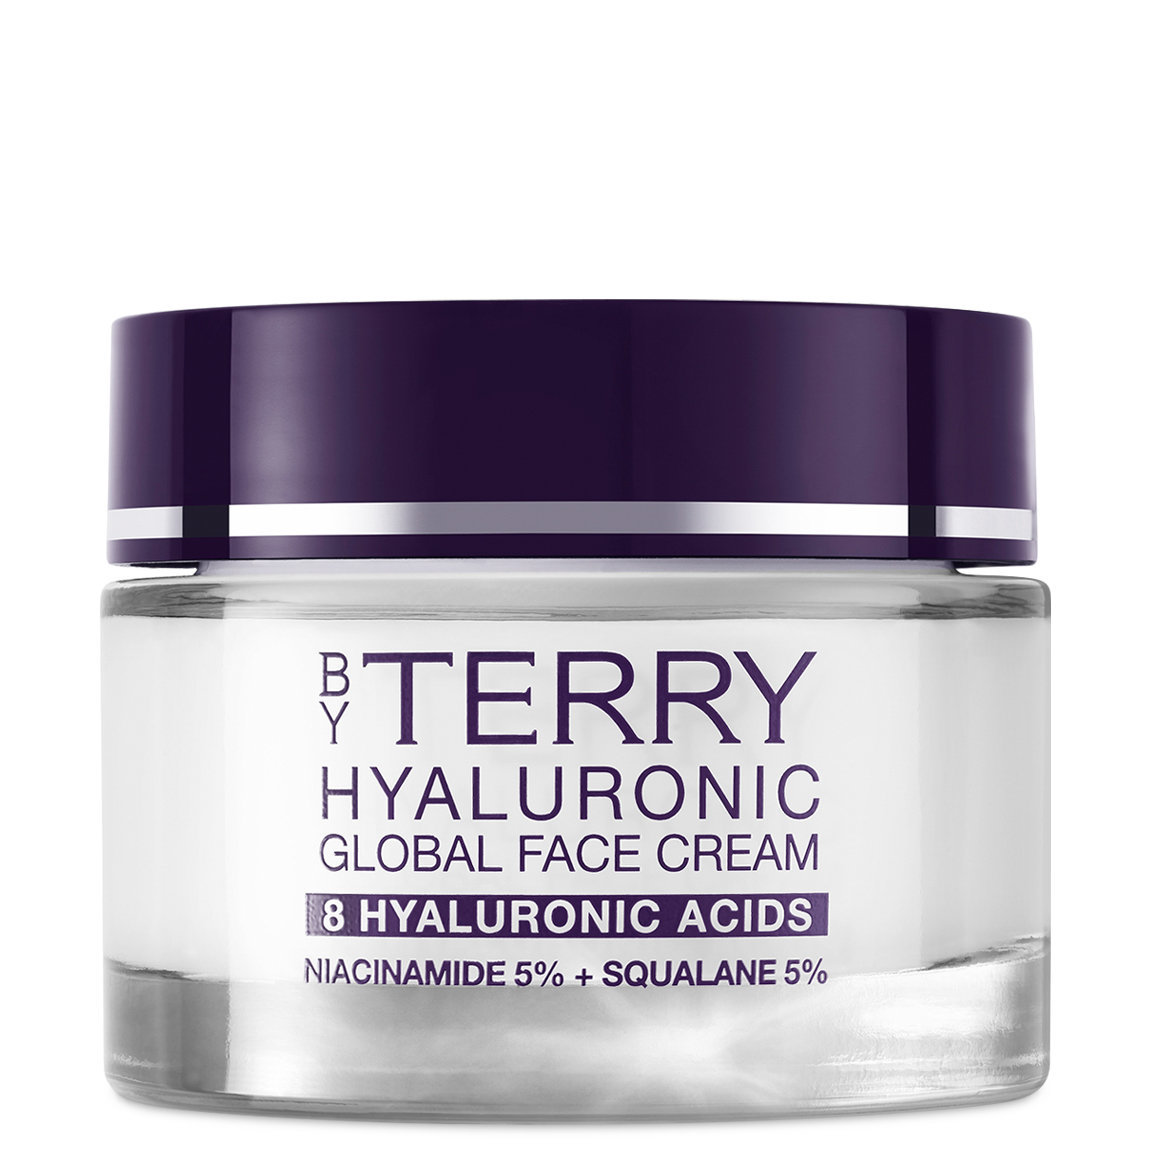 BY TERRY Hyaluronic Global Face Cream alternative view 1 - product swatch.